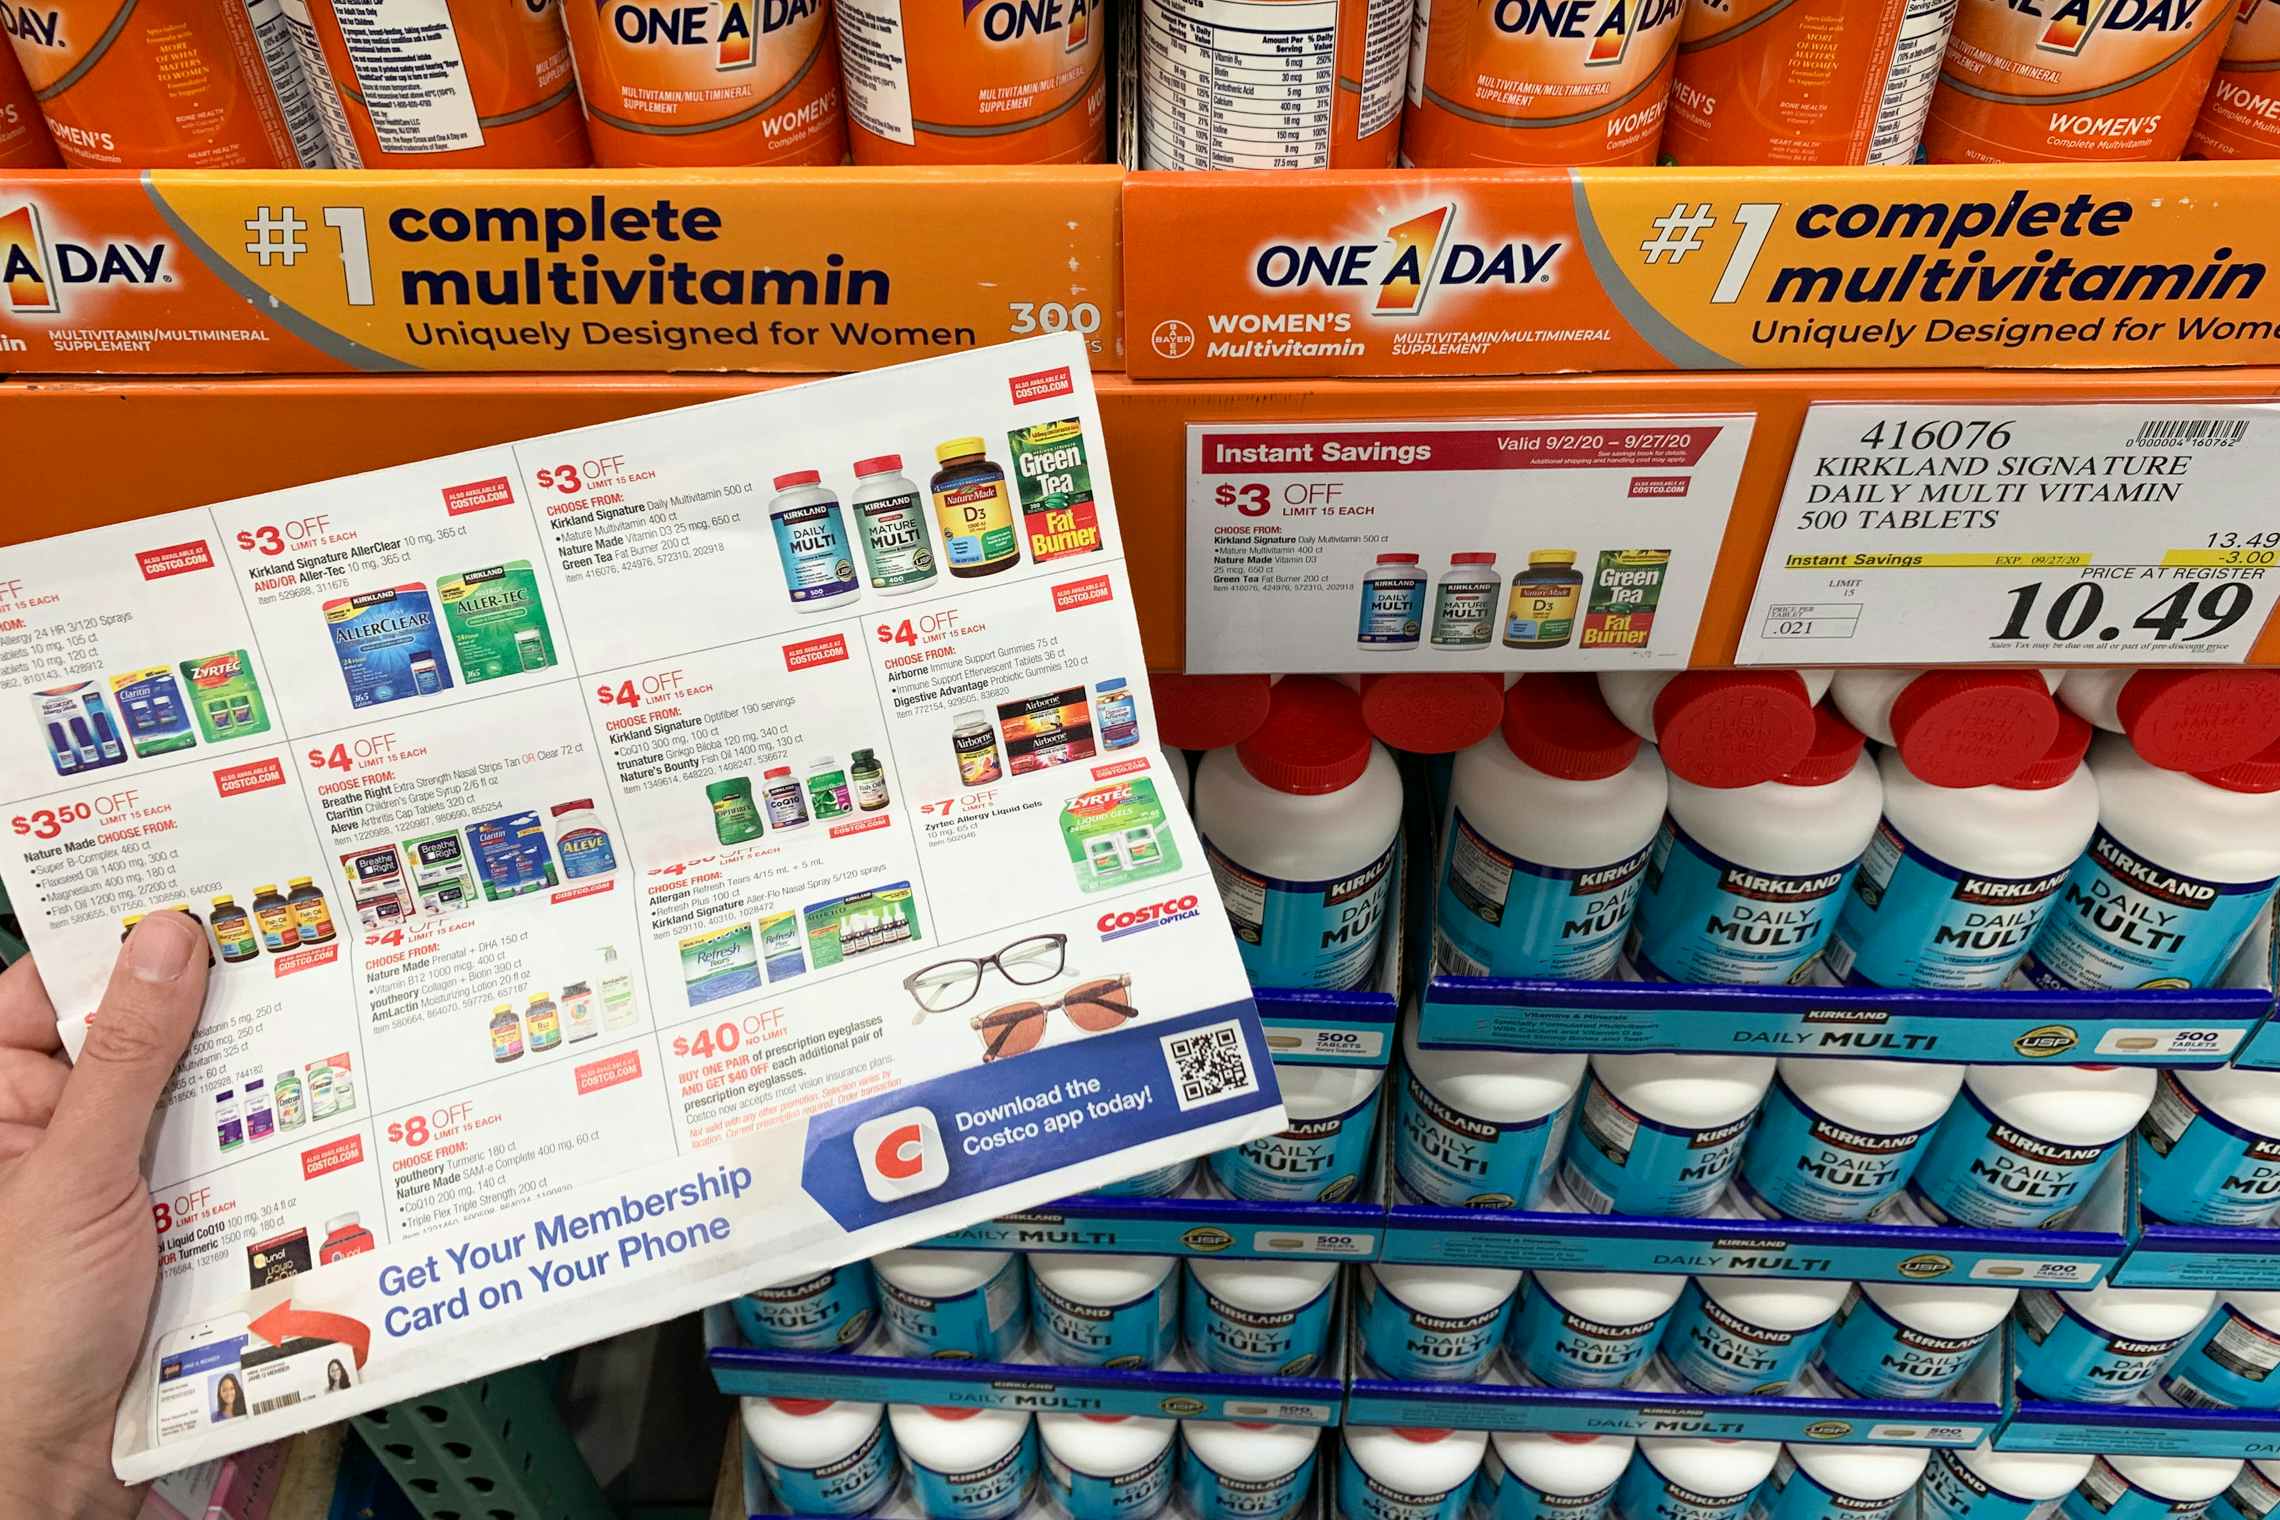 Costco coupon book with Kirkland vitamins on the page and the shelf behind it